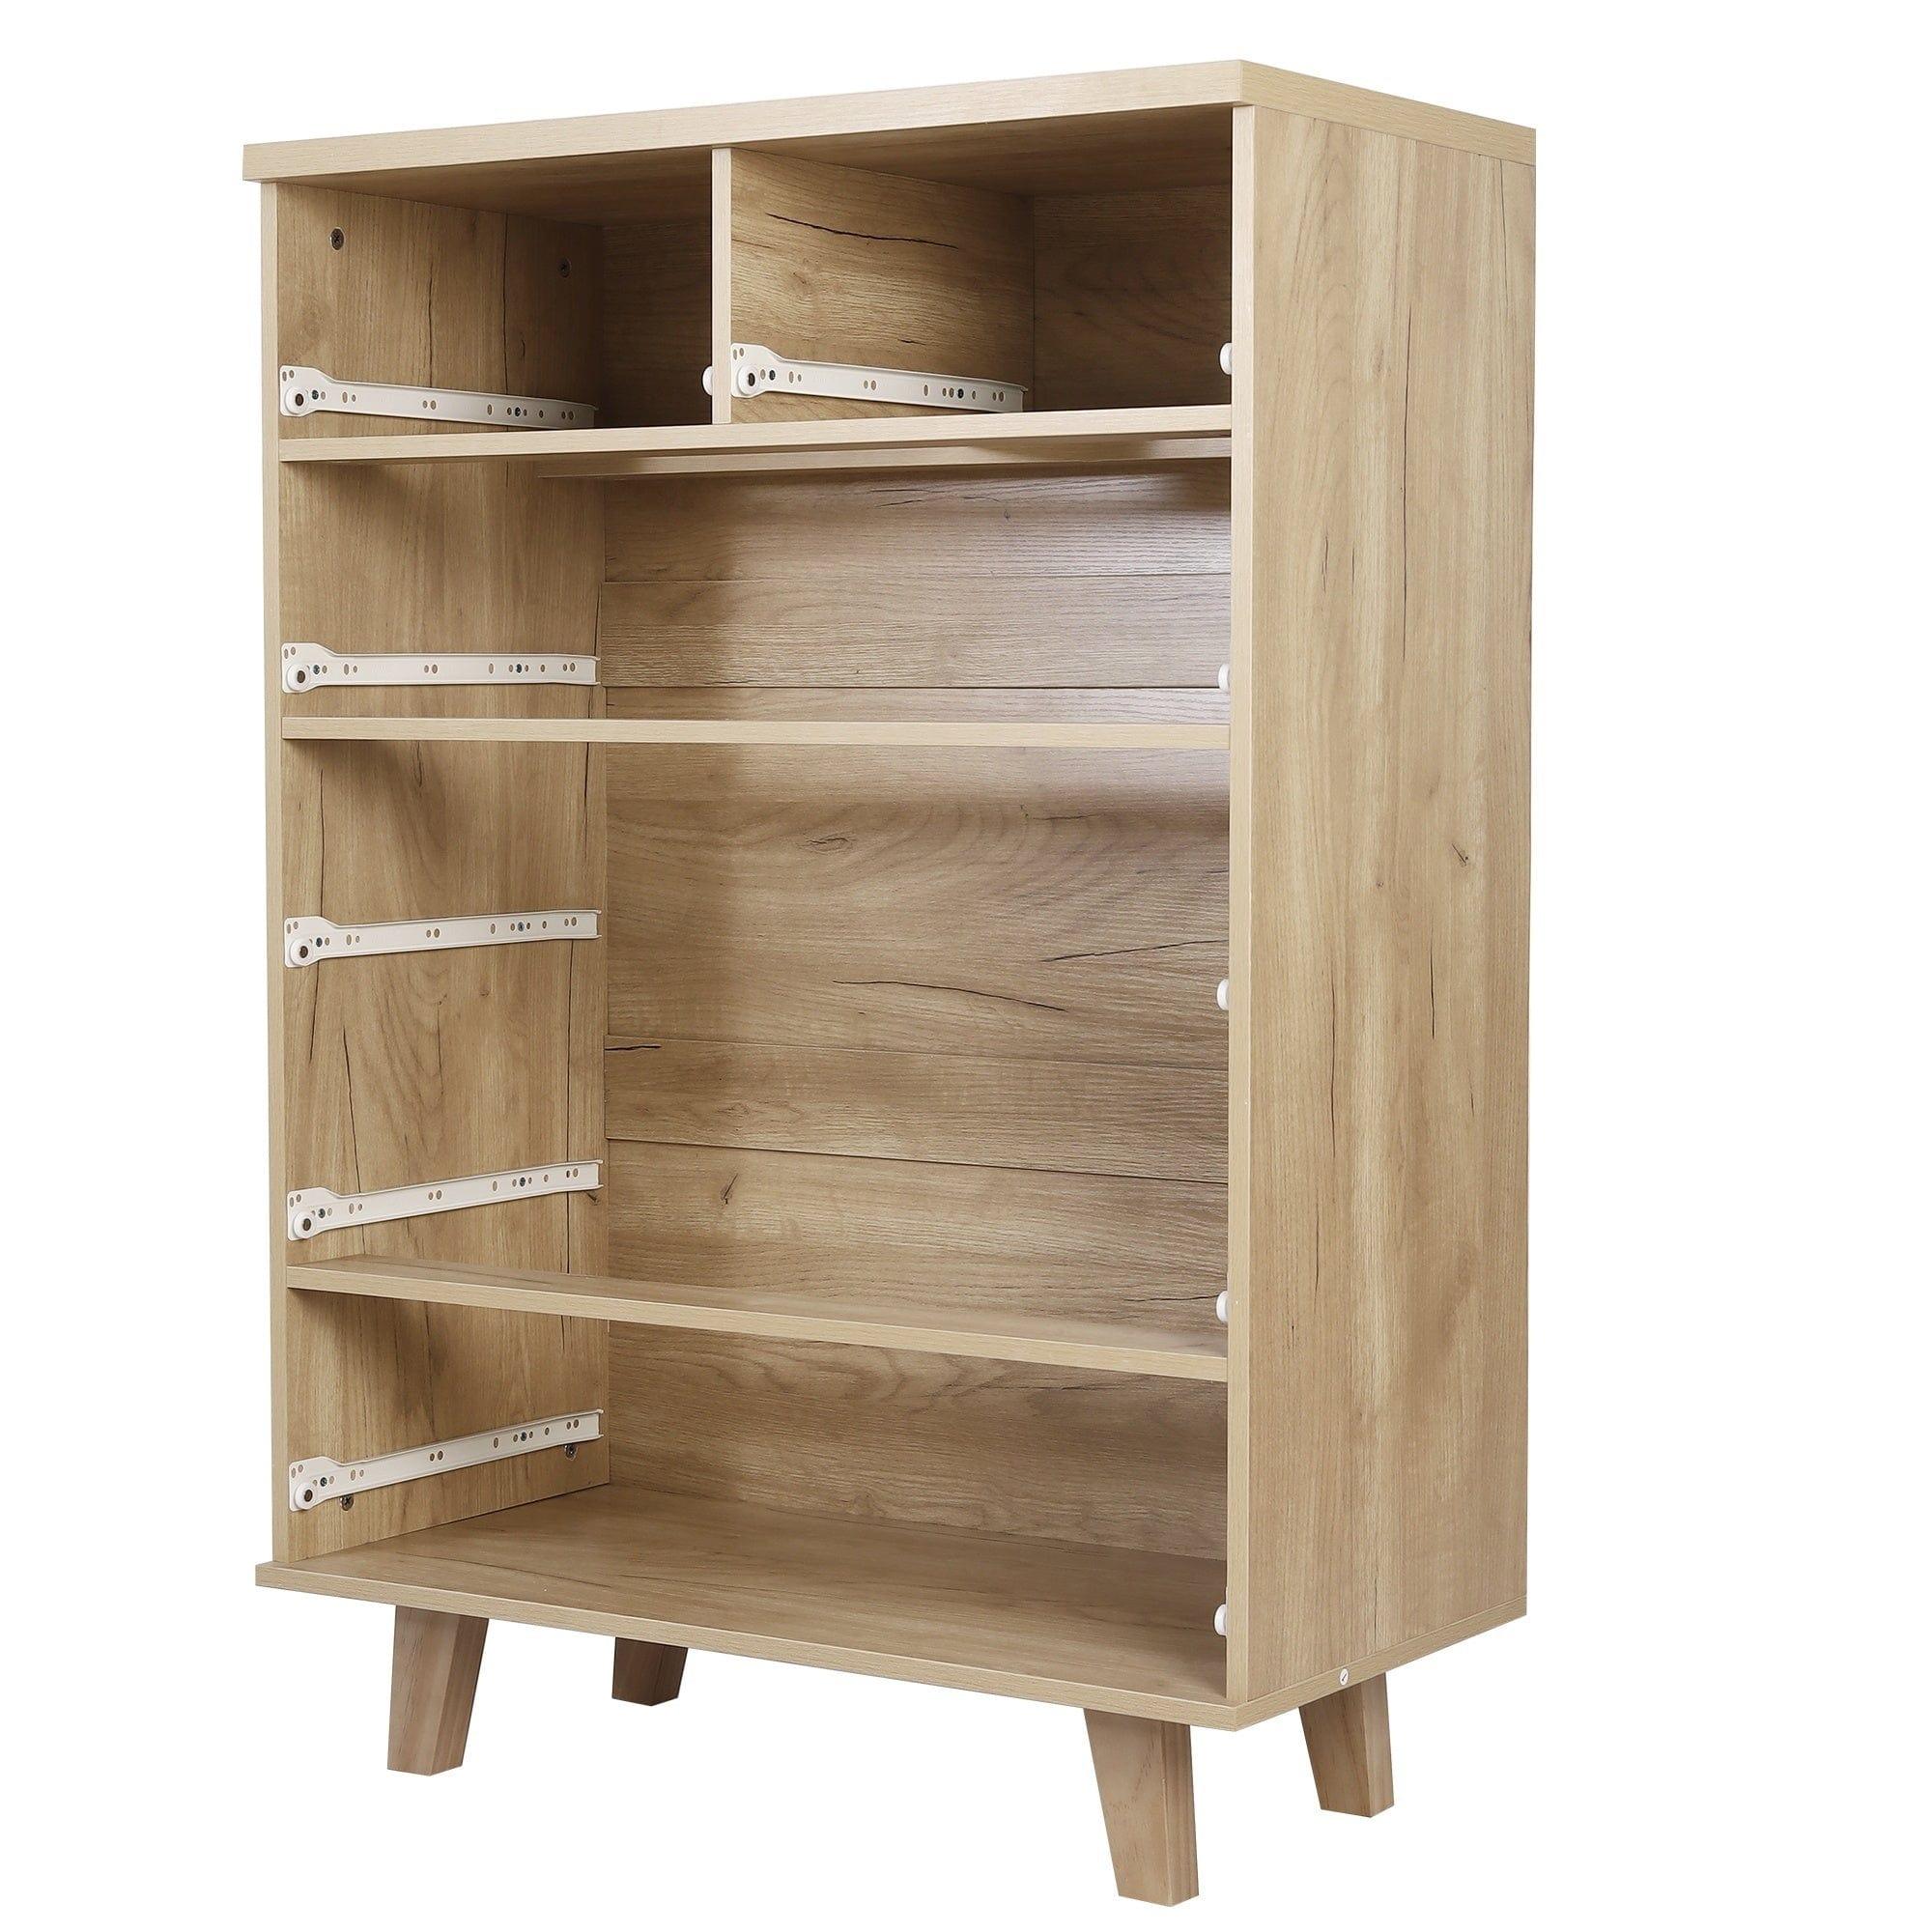 Shop Storage Cabinet Dresser Bedside Table Chest Simple Bedroom Furniture Solid Wood Feet and Handles Fashionable Bedside Cabinet Two and Four Combo Drawers Cabinet Mademoiselle Home Decor